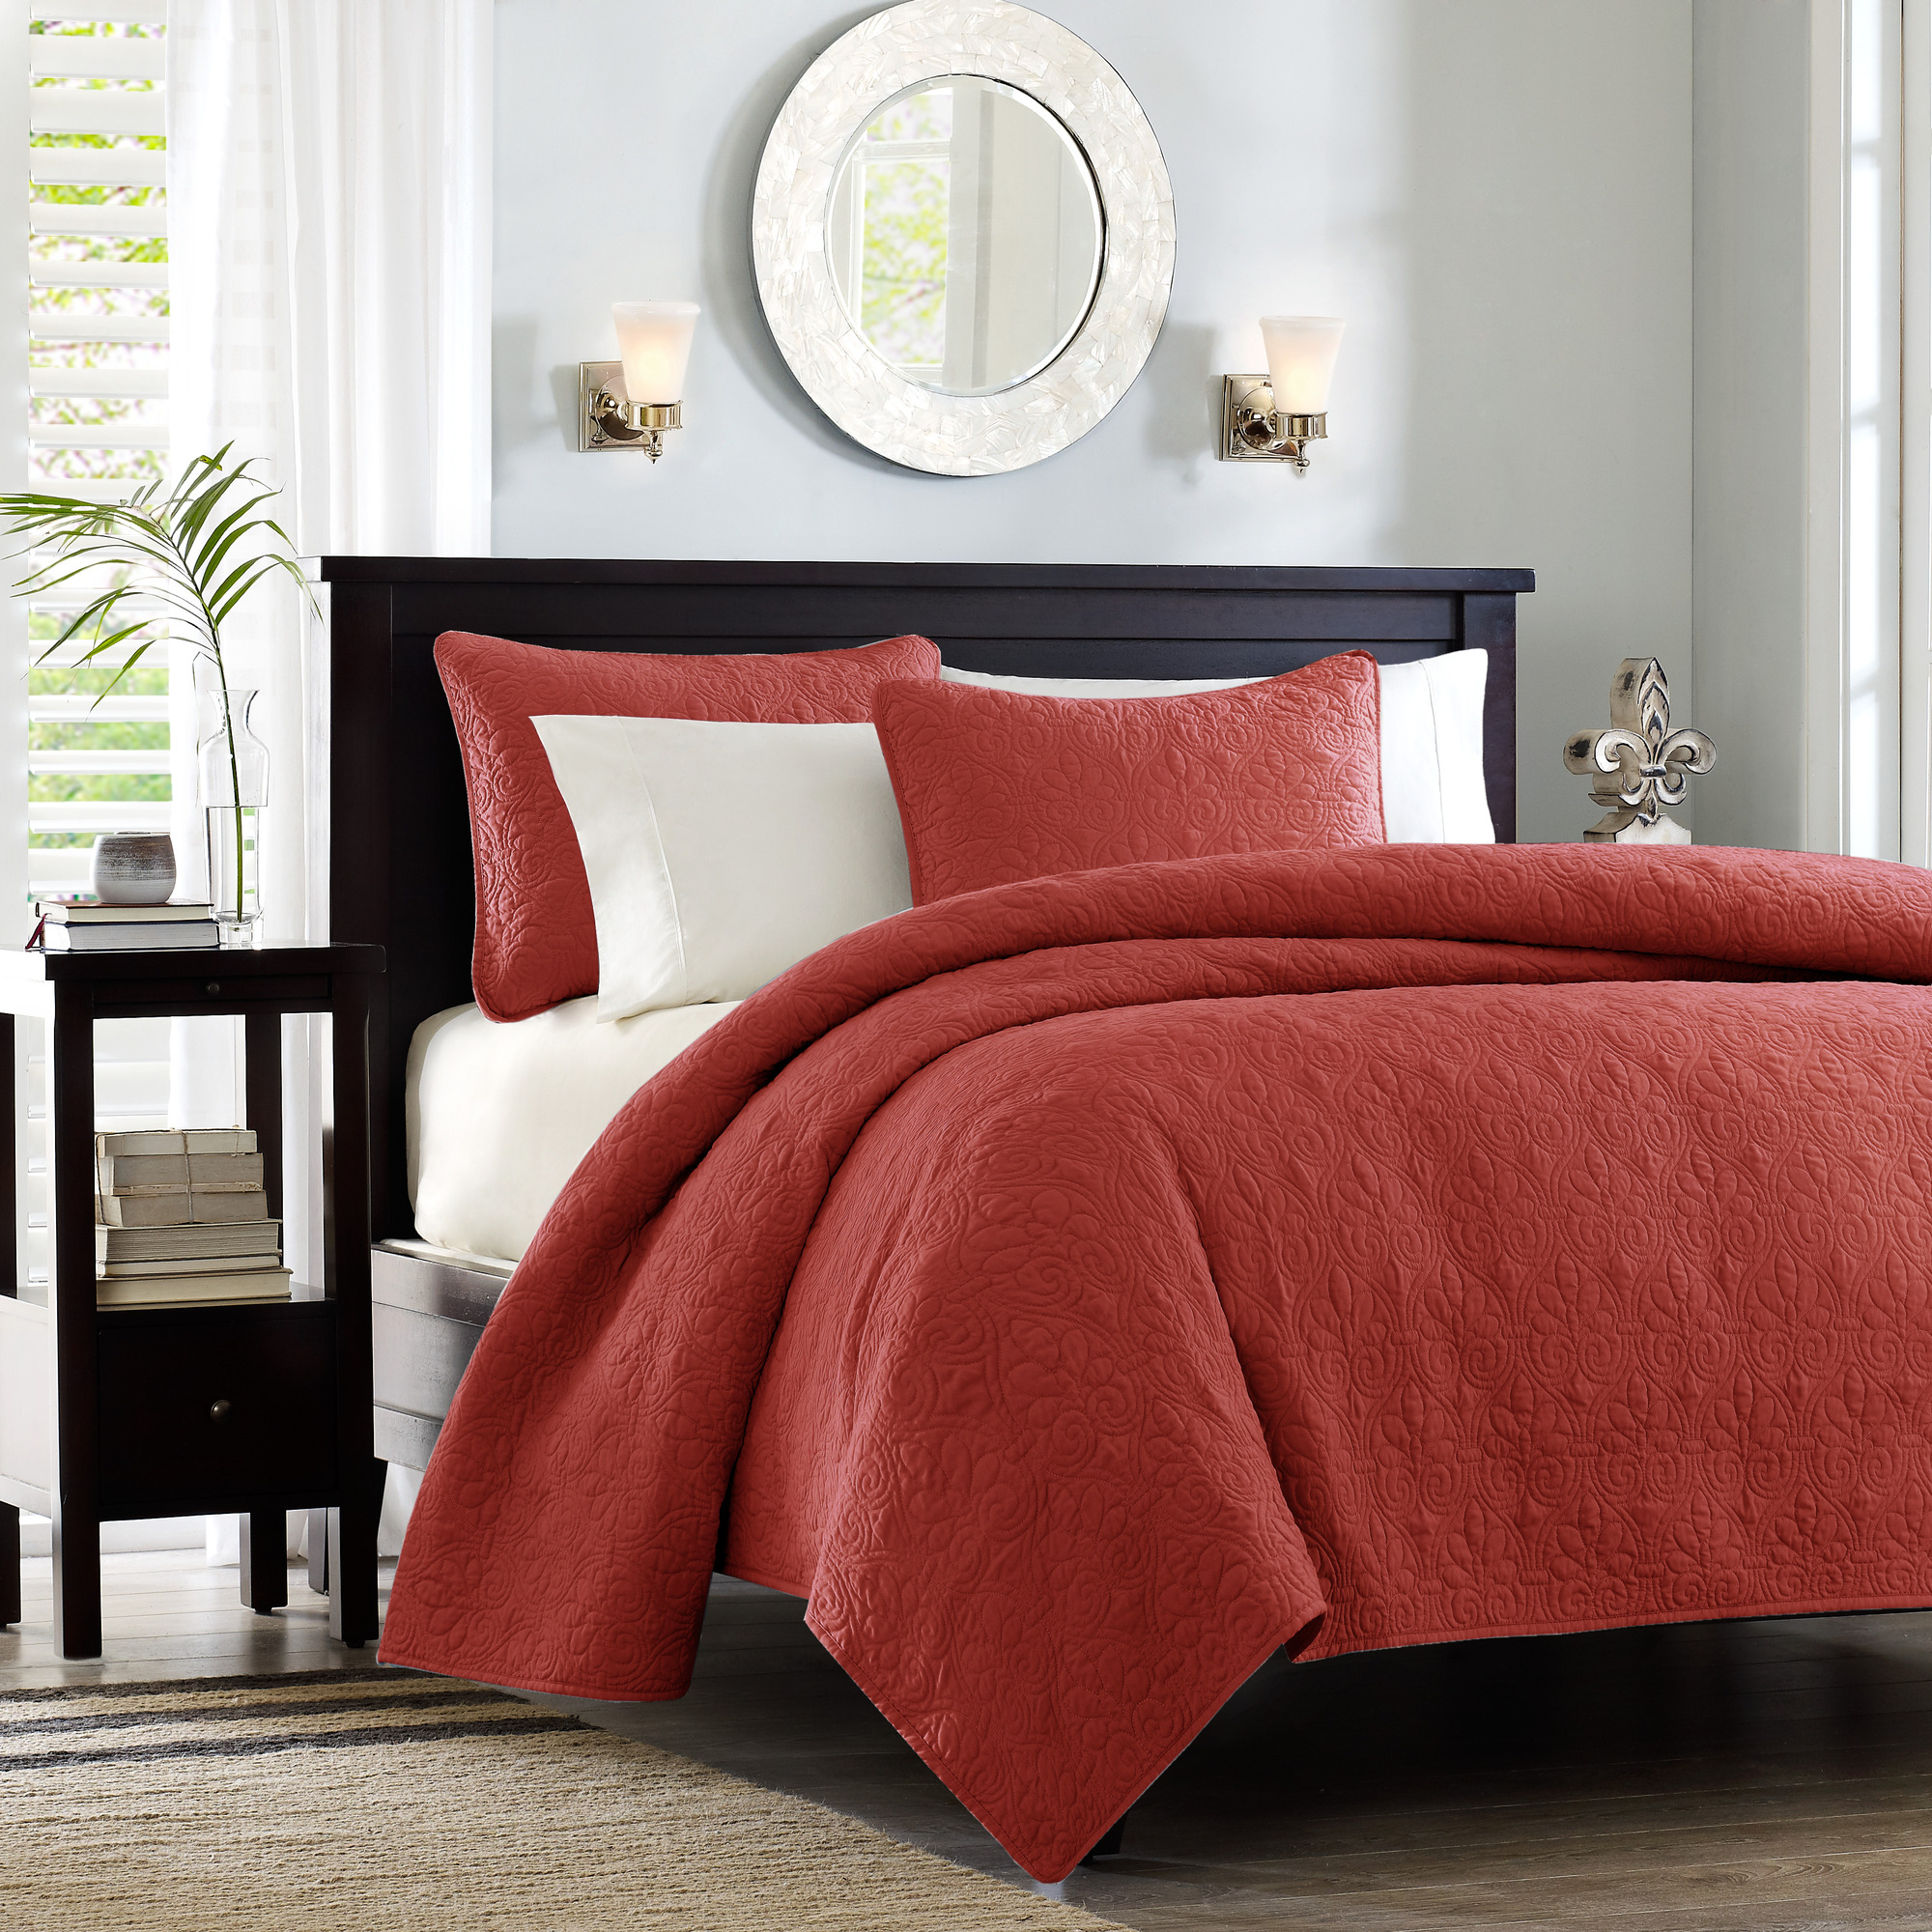 Home Essence Vancouver Super Soft Reversible Coverlet Set, Red, Twin/Twin XL - image 1 of 13